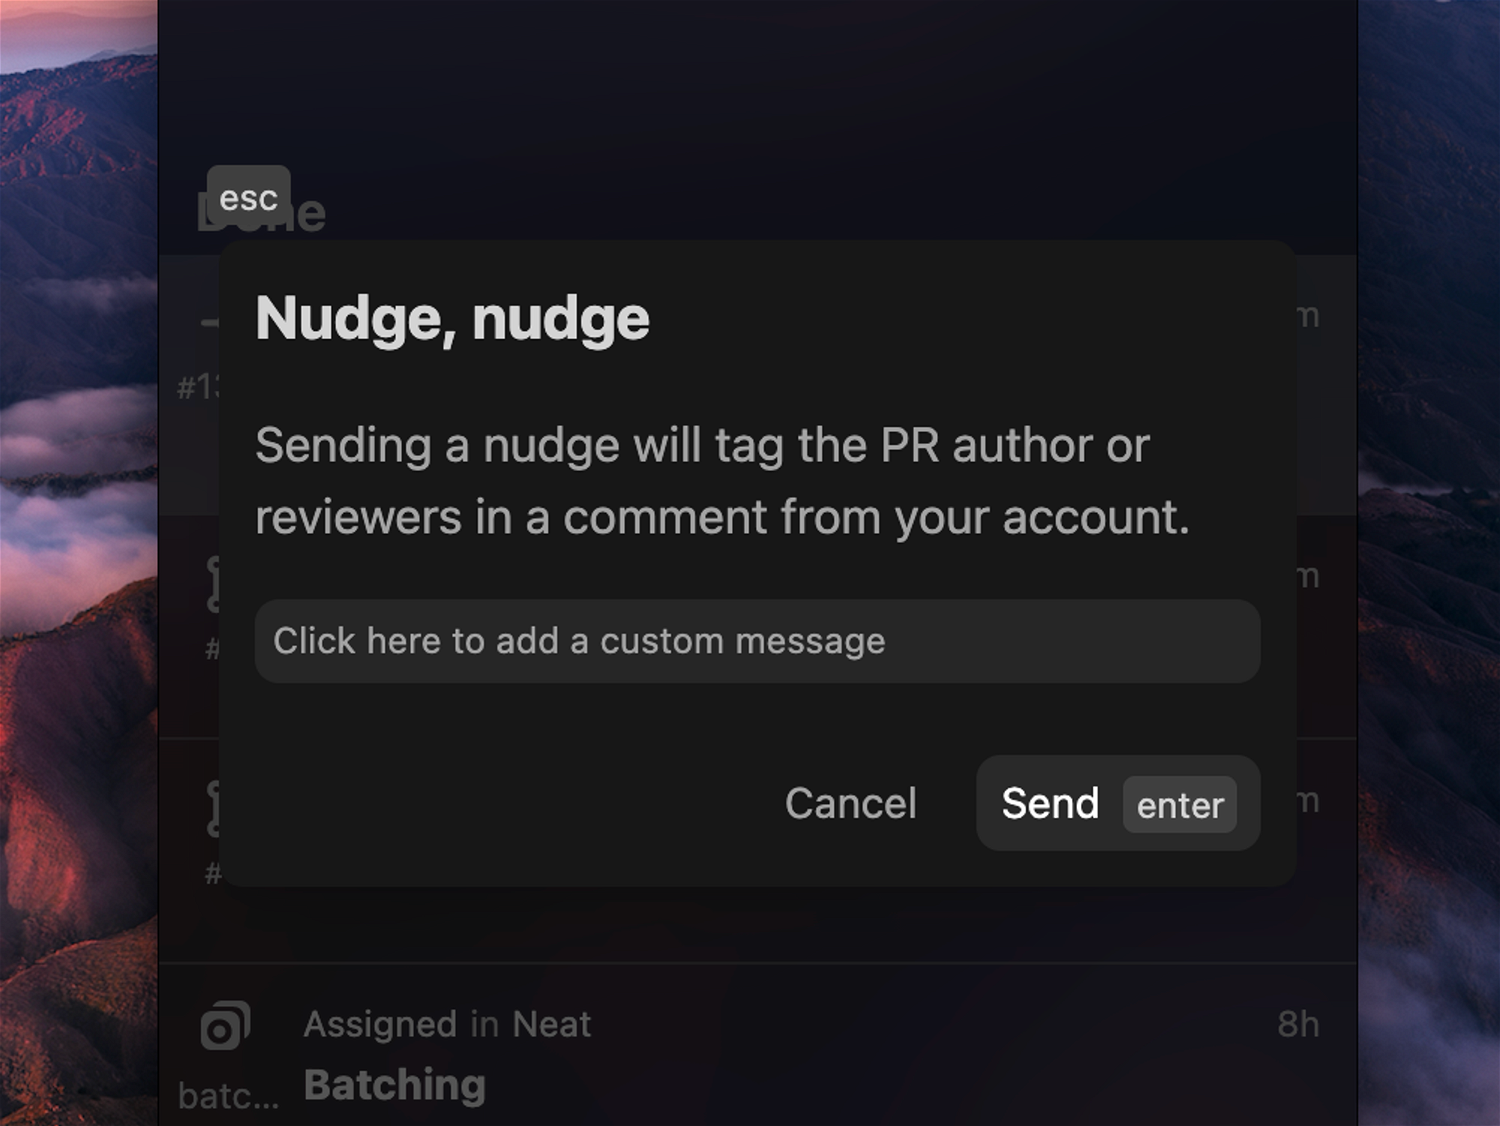 Nudge messages can now be customized.